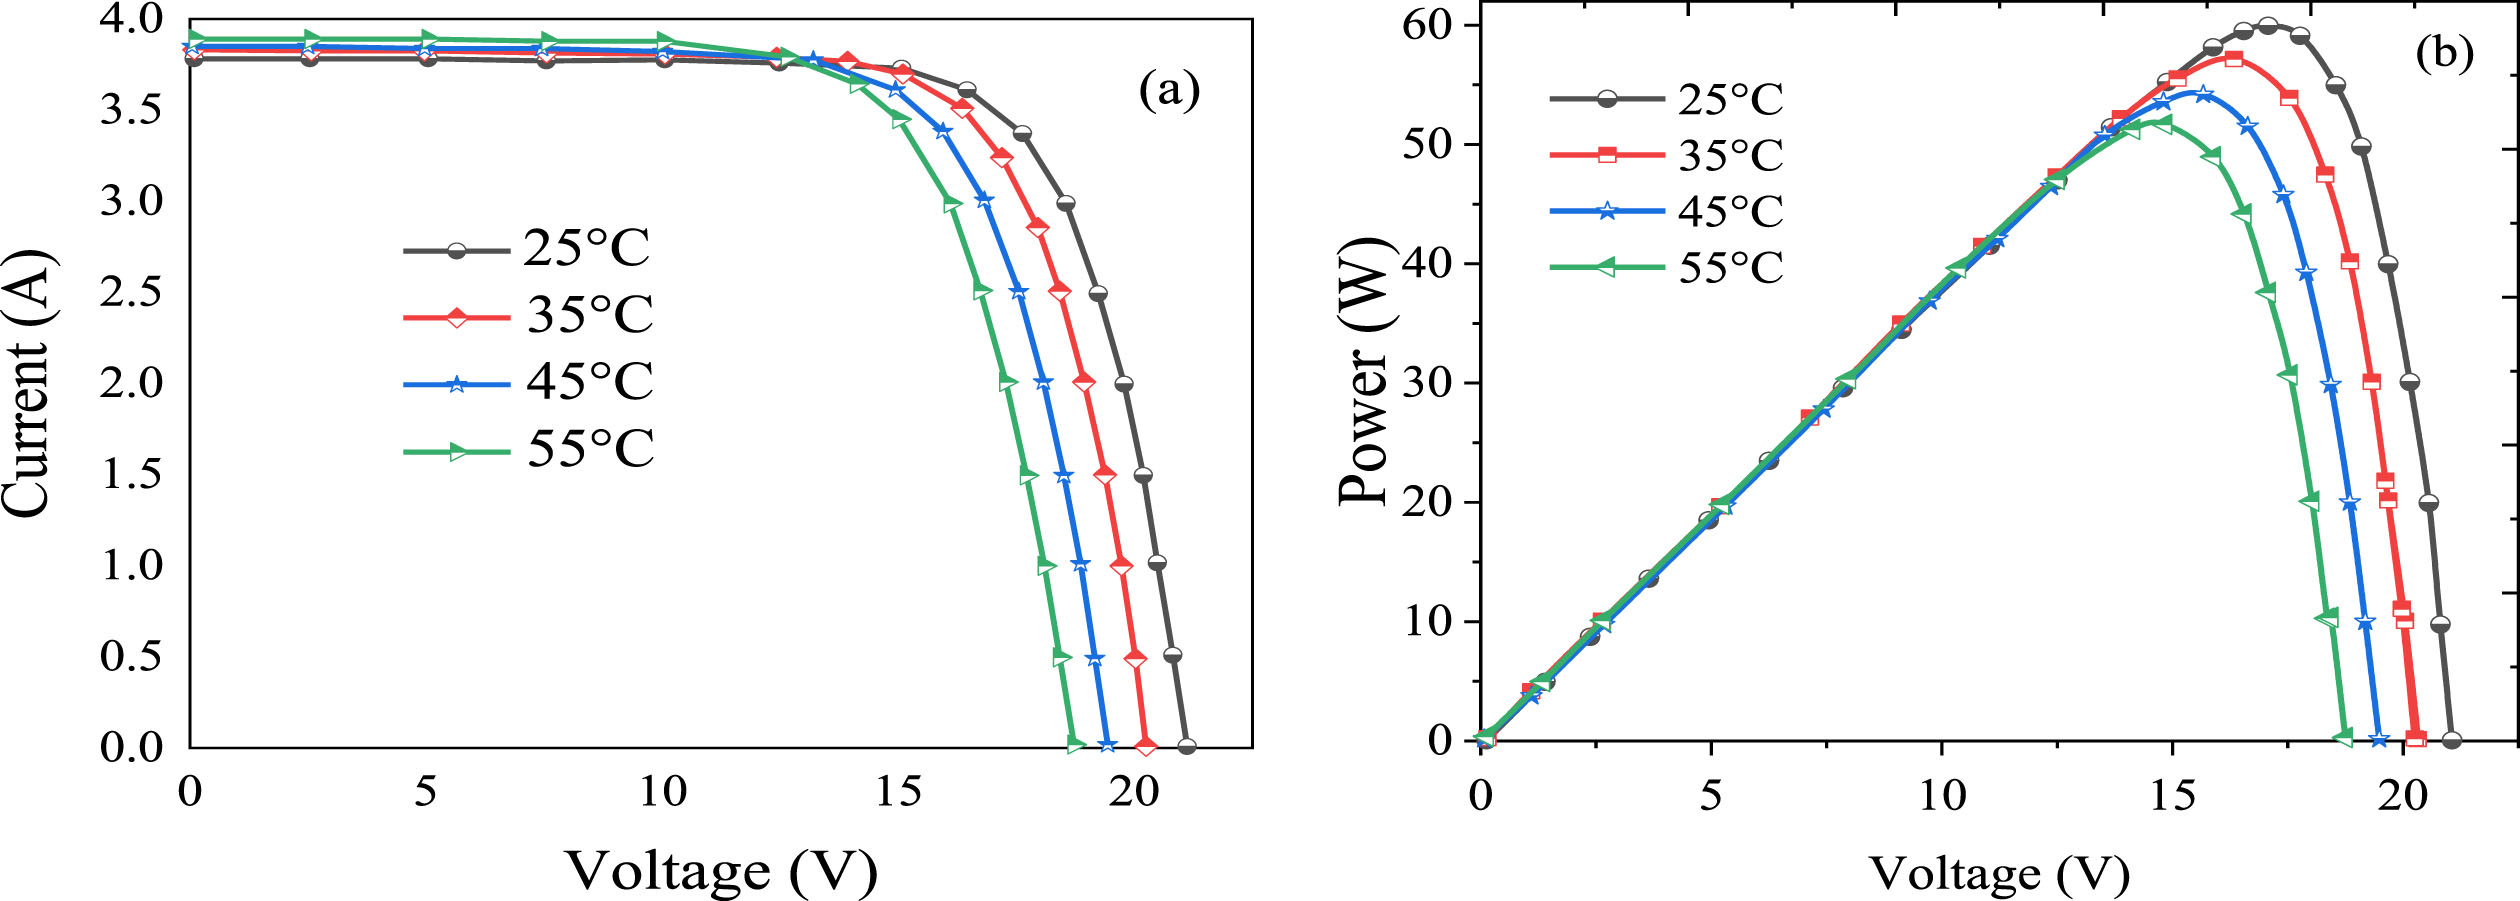 Solar panel characteristics I-V (a) and P-V (b) curve at constant irradiation and varying temperatures.